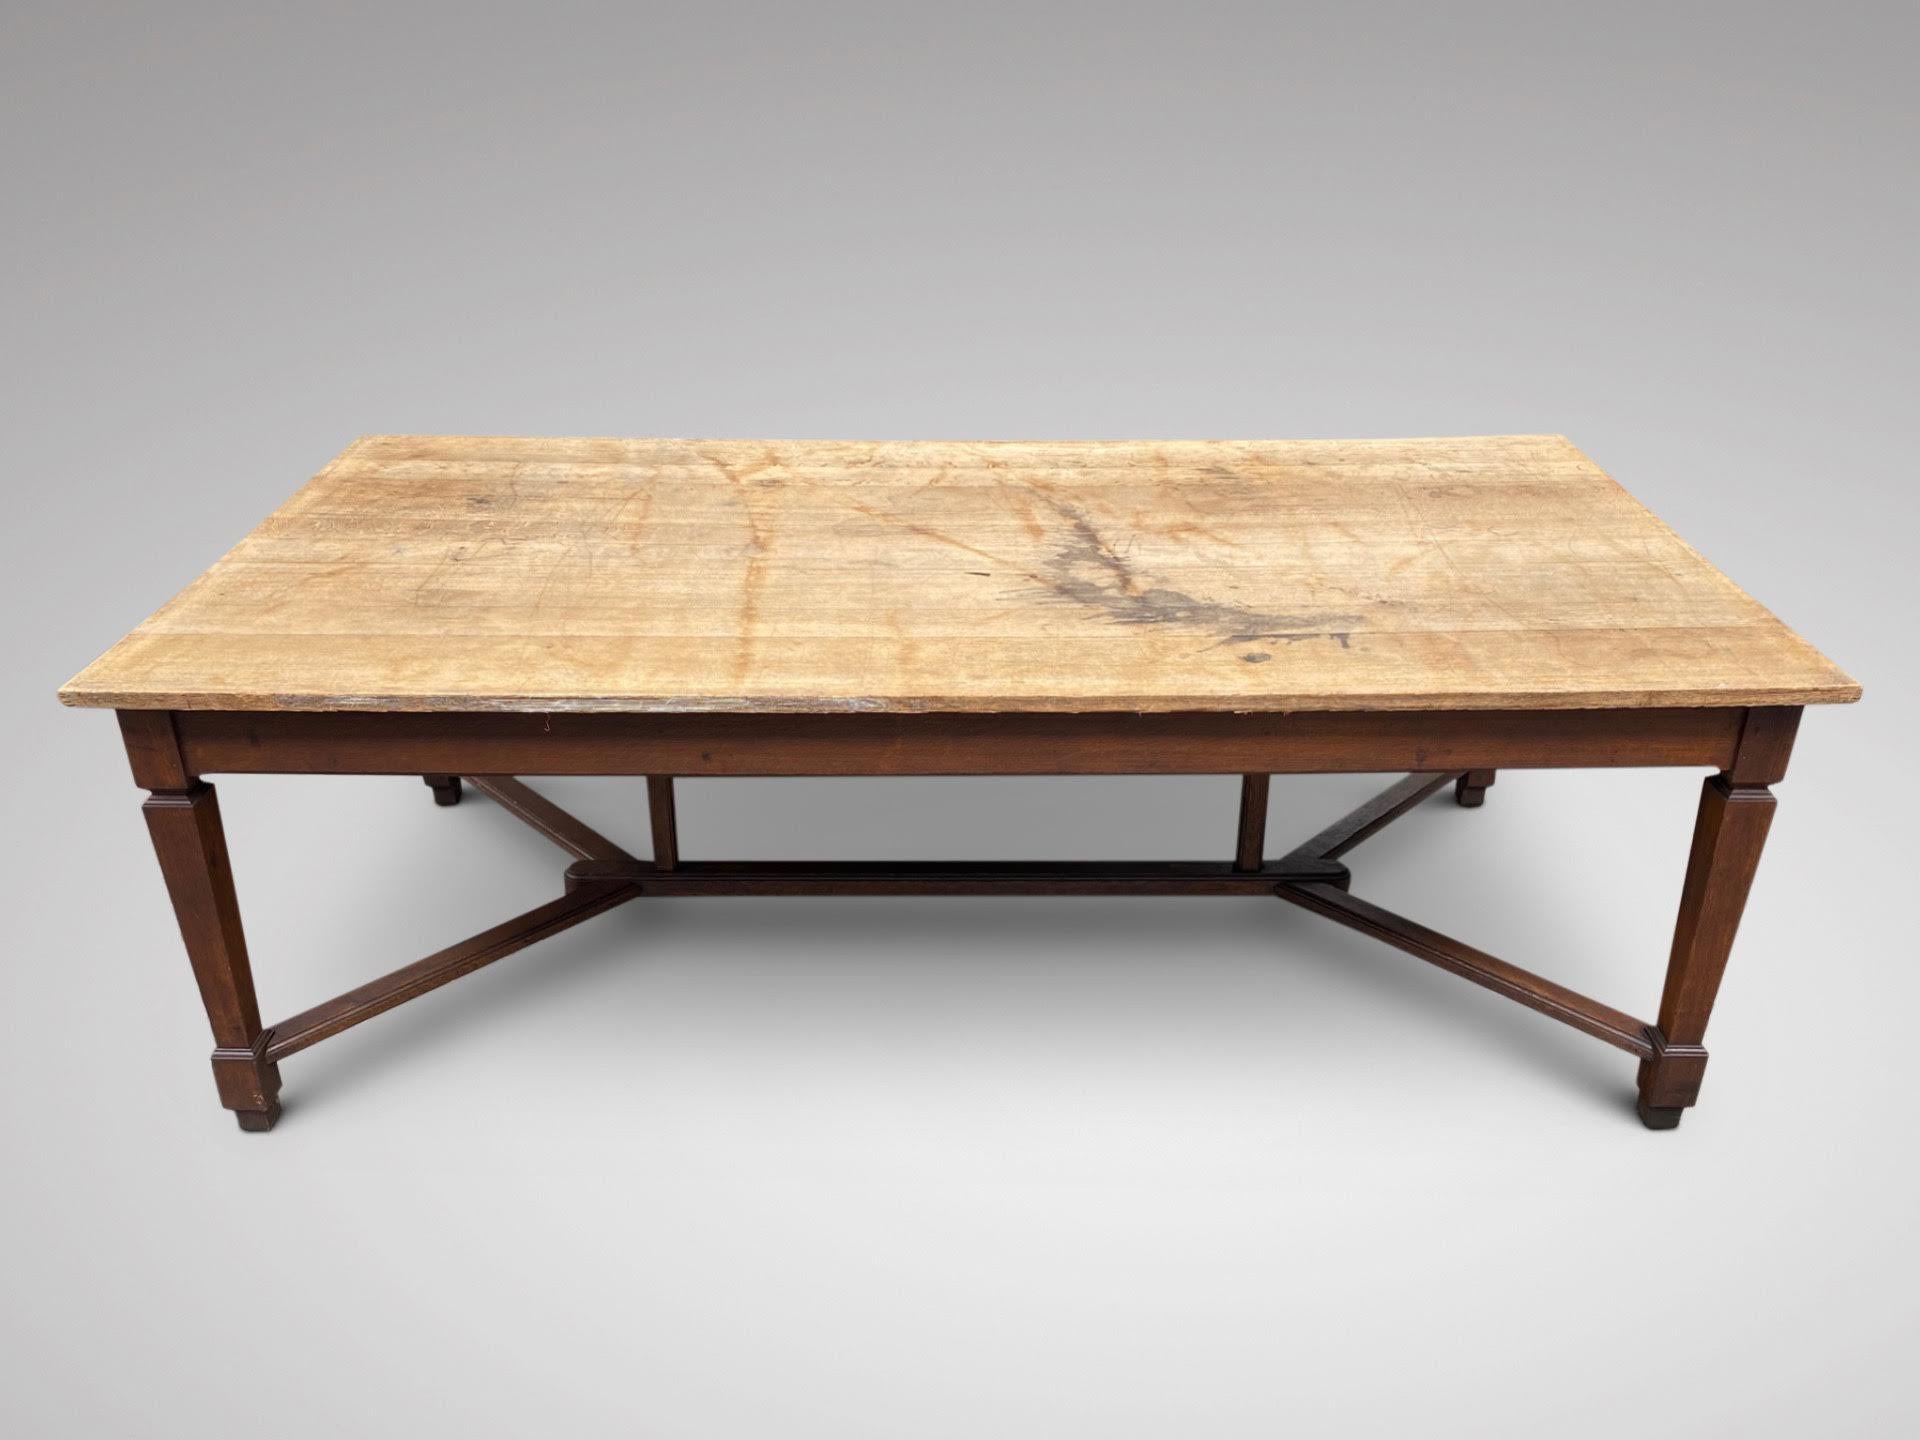 A stunning antique 19th century oak Hayrake Farmhouse work or dining table. A solid pale coloured oak plank top supported by a very sturdy base with a centre stretcher base frame. All standing on four square tapering legs united by 